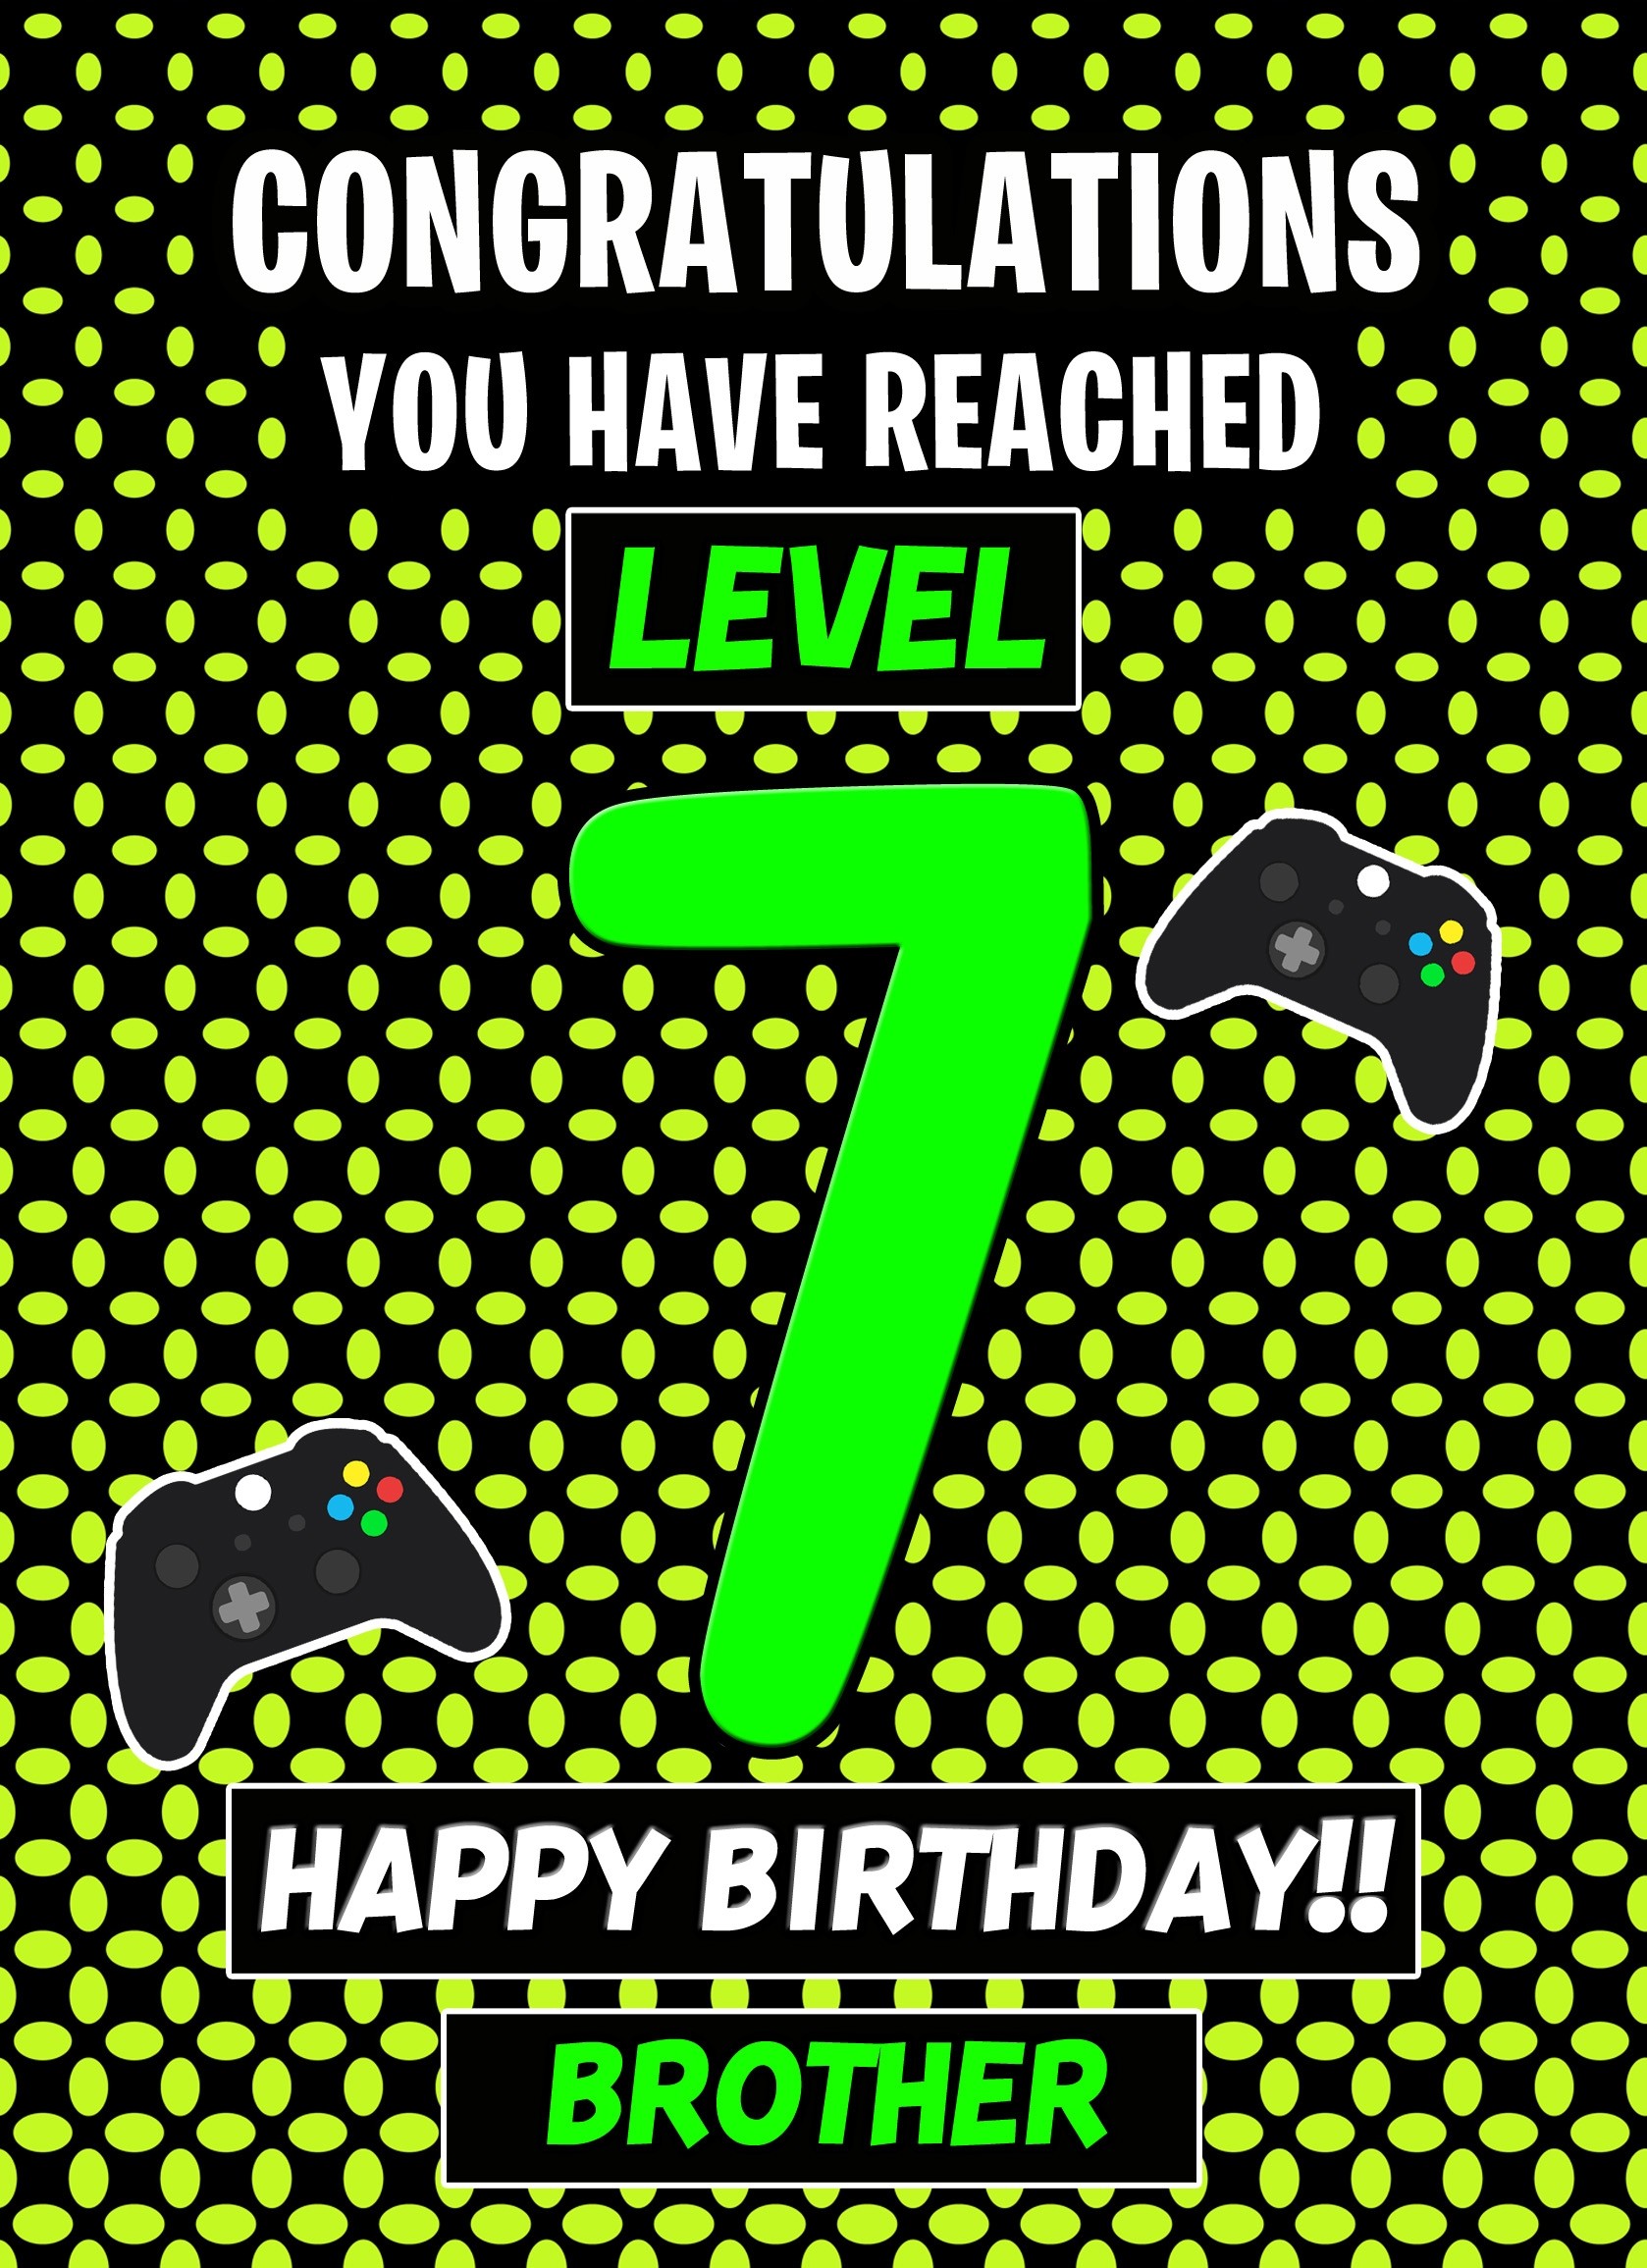 Brother 7th Birthday Card (Level Up Gamer)